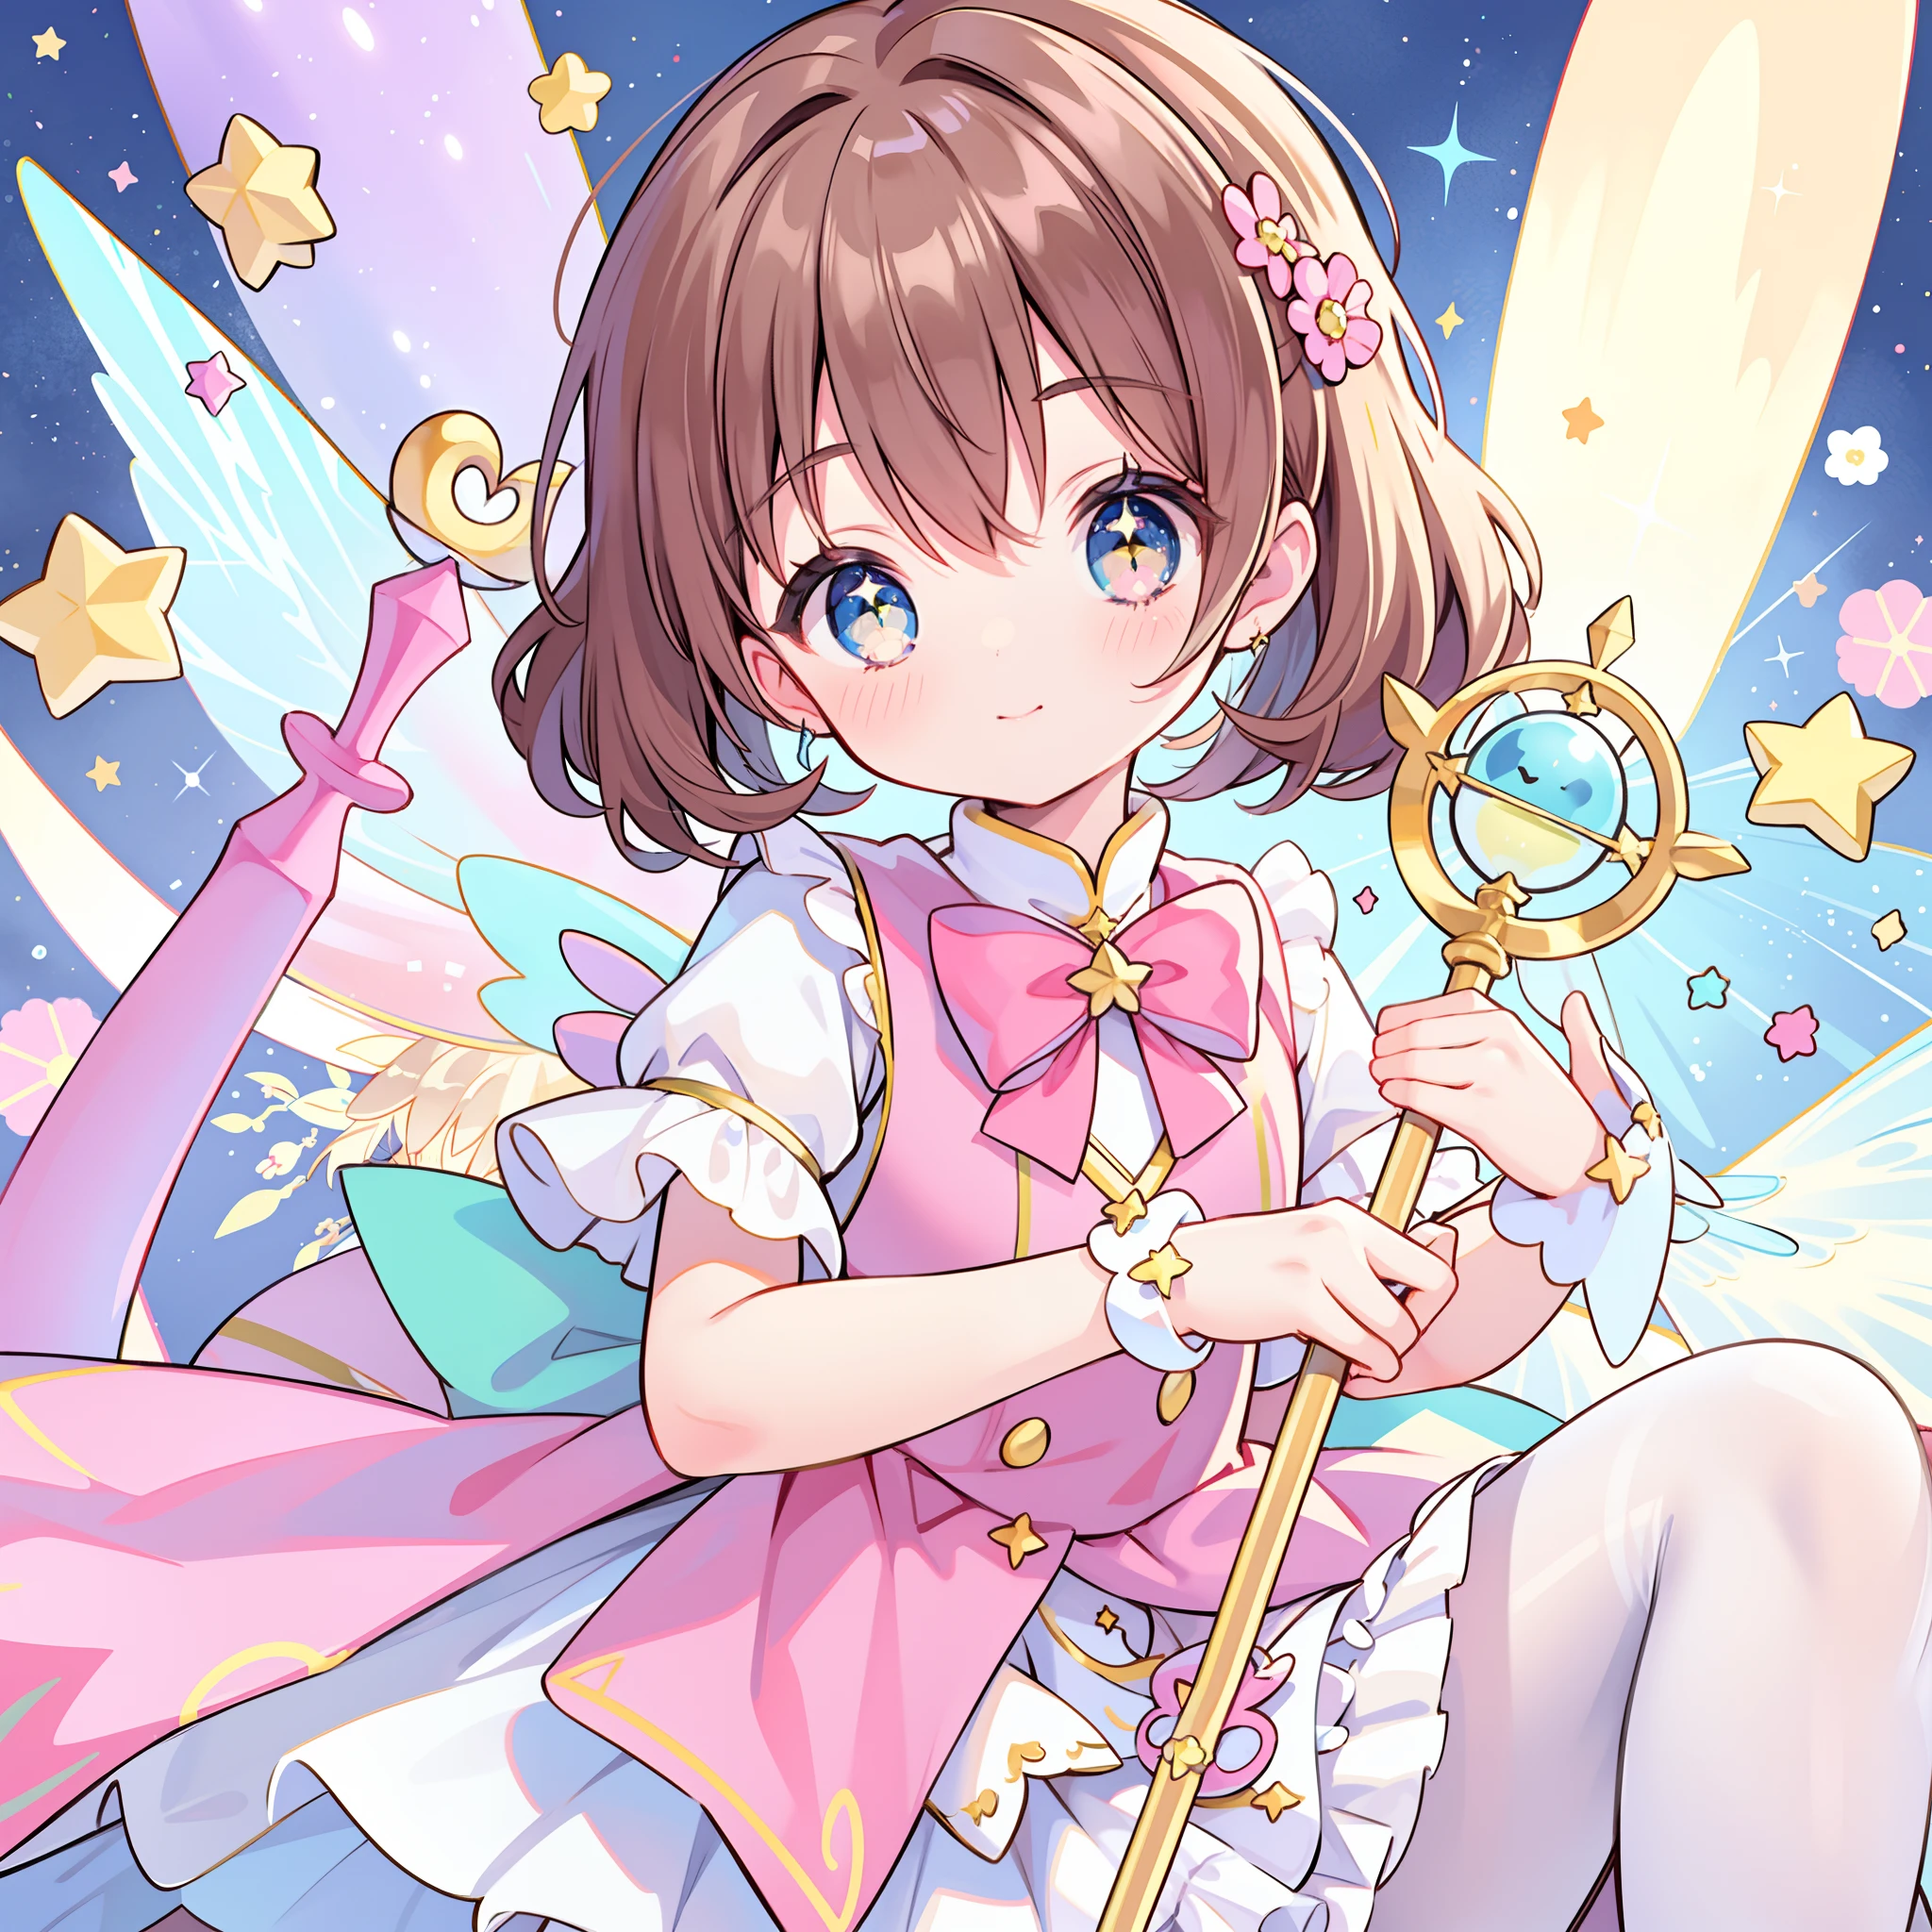 k hd，Anime girl with wand and star wand in her hand, portrait of magical girl, sparkling magical girl, magical , cardcaptor sakura, pin on anime, clean and meticulous anime art, magical girl anime mahou shojo, beautiful anime art style, cute anime girl portraits, carrying a magical staff, zerochan art, lovely art style, astral fairy, Soft anime illustration